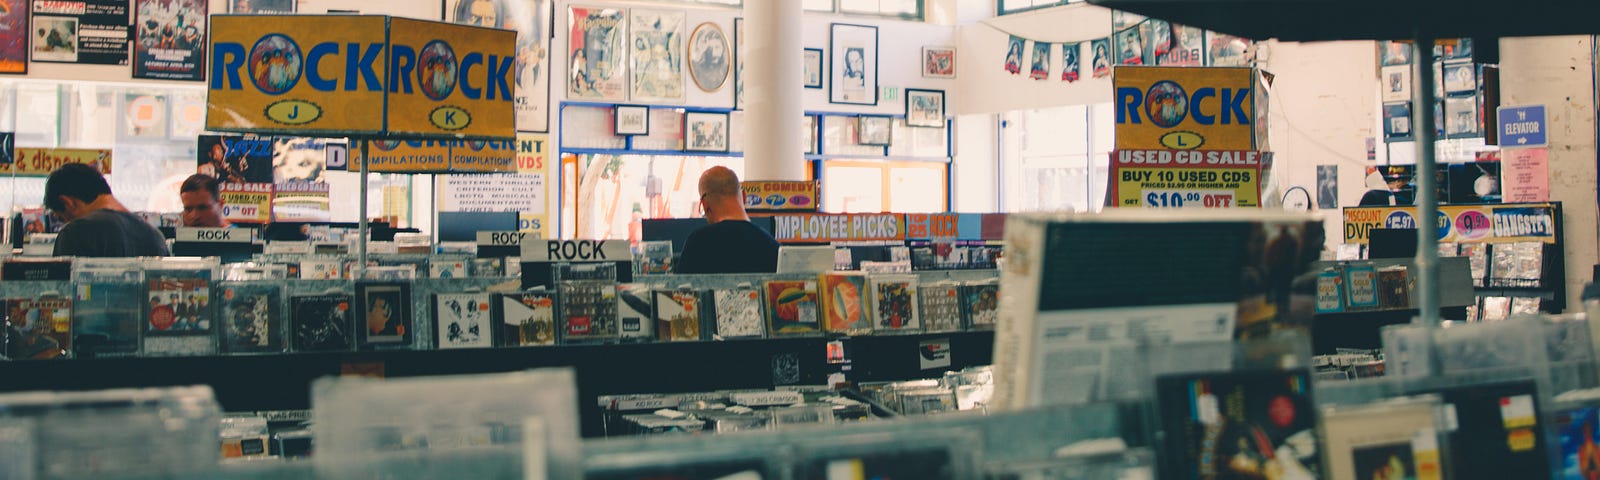 A record store filled with rock and classic rock records and CDs